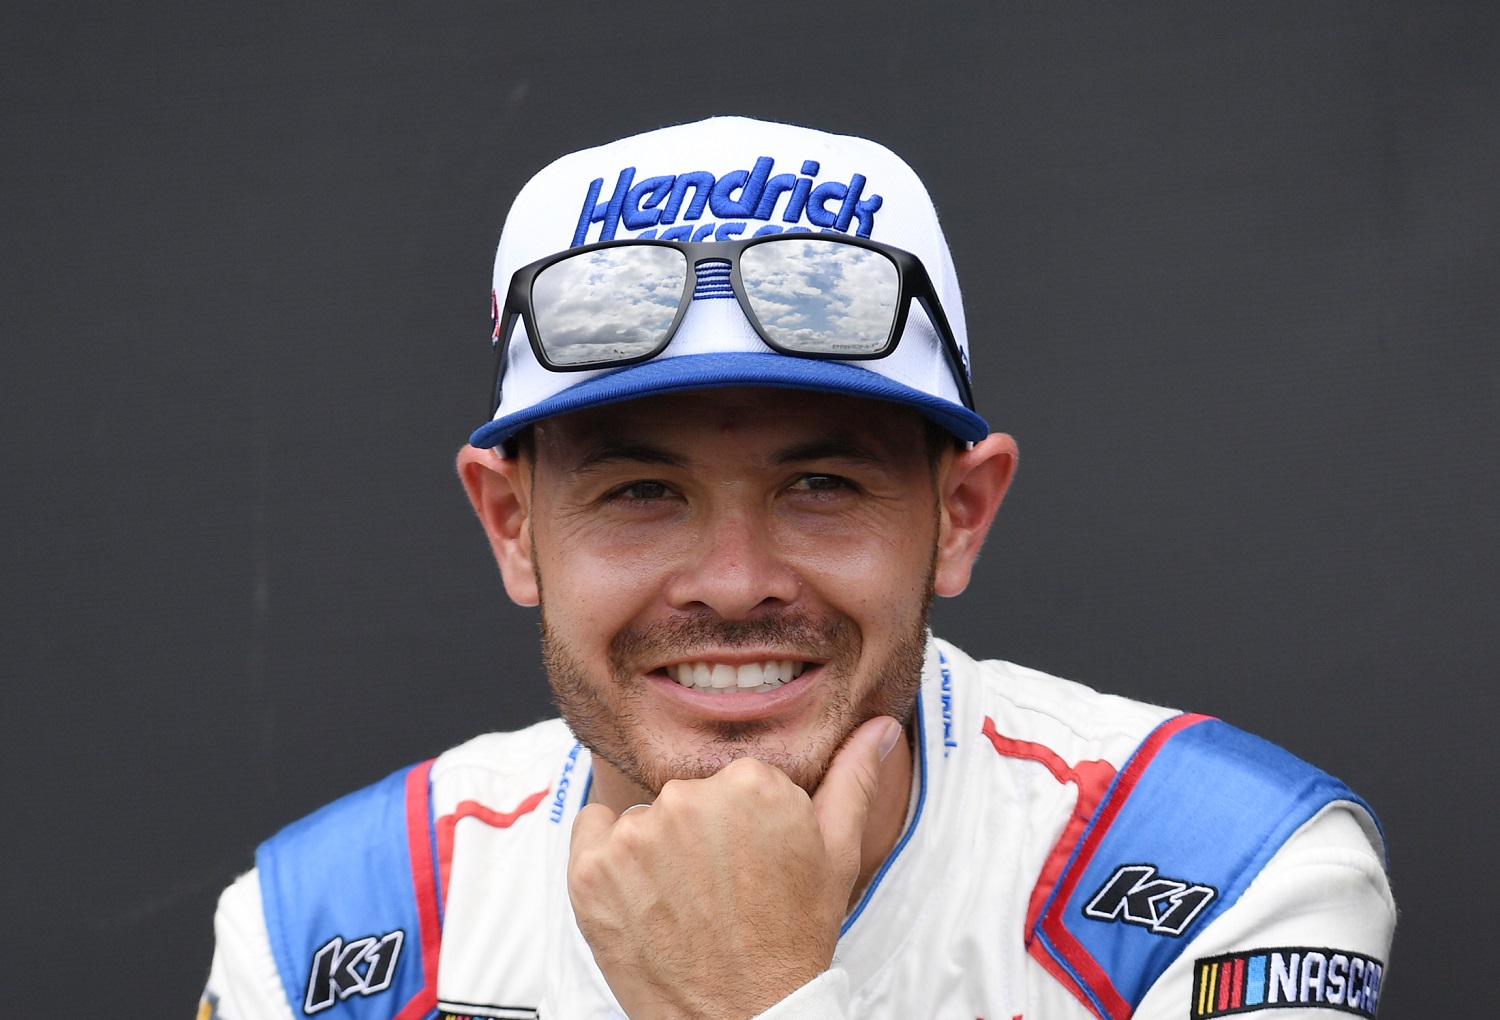 Kyle Larson looks on during pre-race activities before the running of the NASCAR Cup Series Quaker State 400 on July 9, 2022, at Atlanta Motor Speedway. | Jeffrey Vest/Icon Sportswire via Getty Images